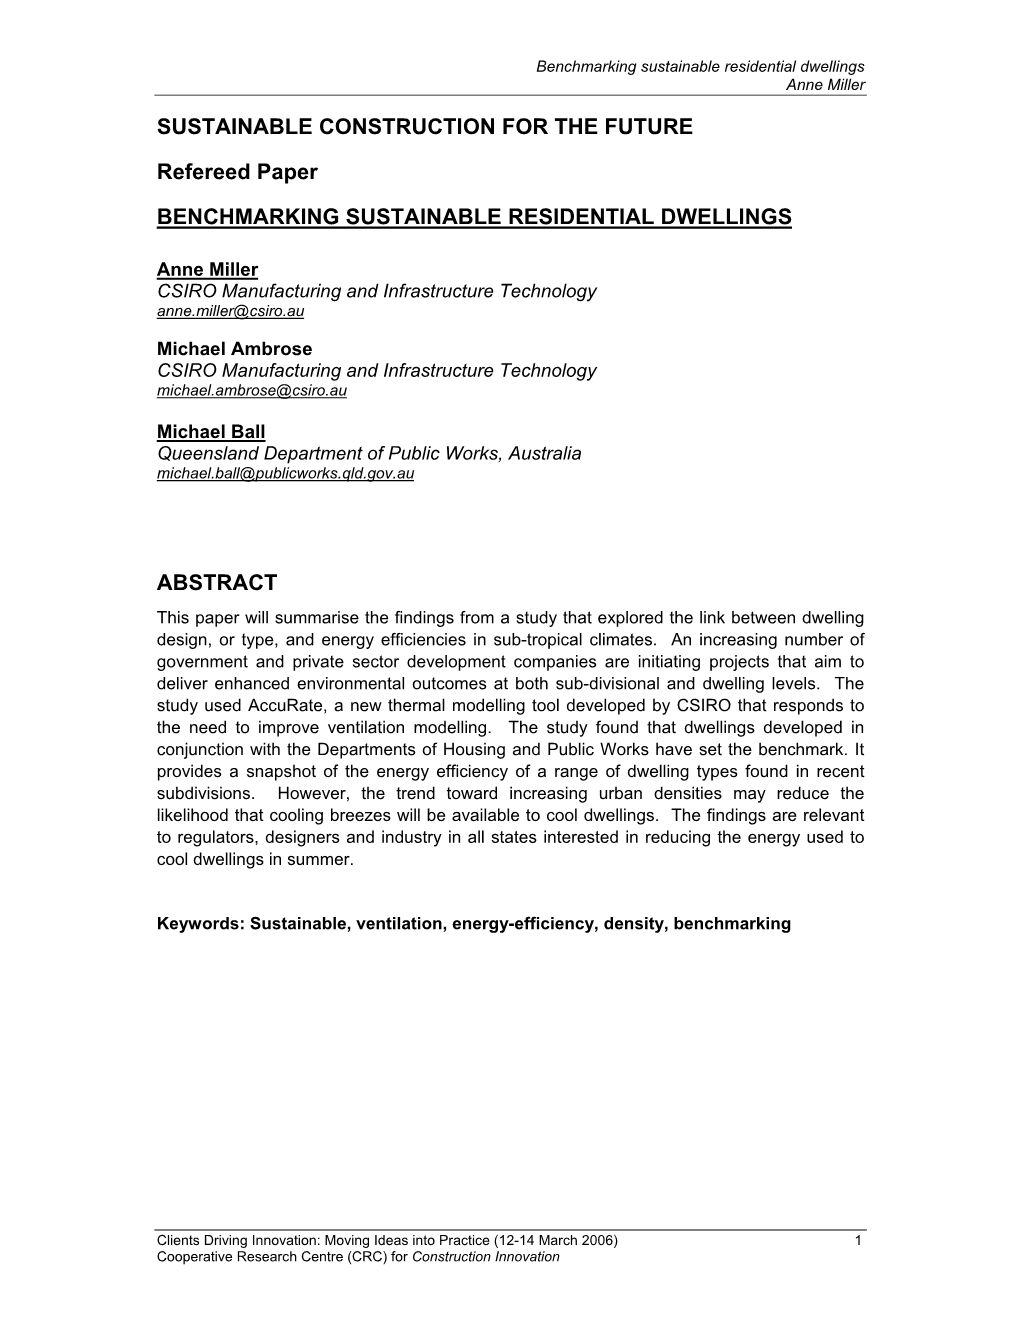 SUSTAINABLE CONSTRUCTION for the FUTURE Refereed Paper BENCHMARKING SUSTAINABLE RESIDENTIAL DWELLINGS ABSTRACT